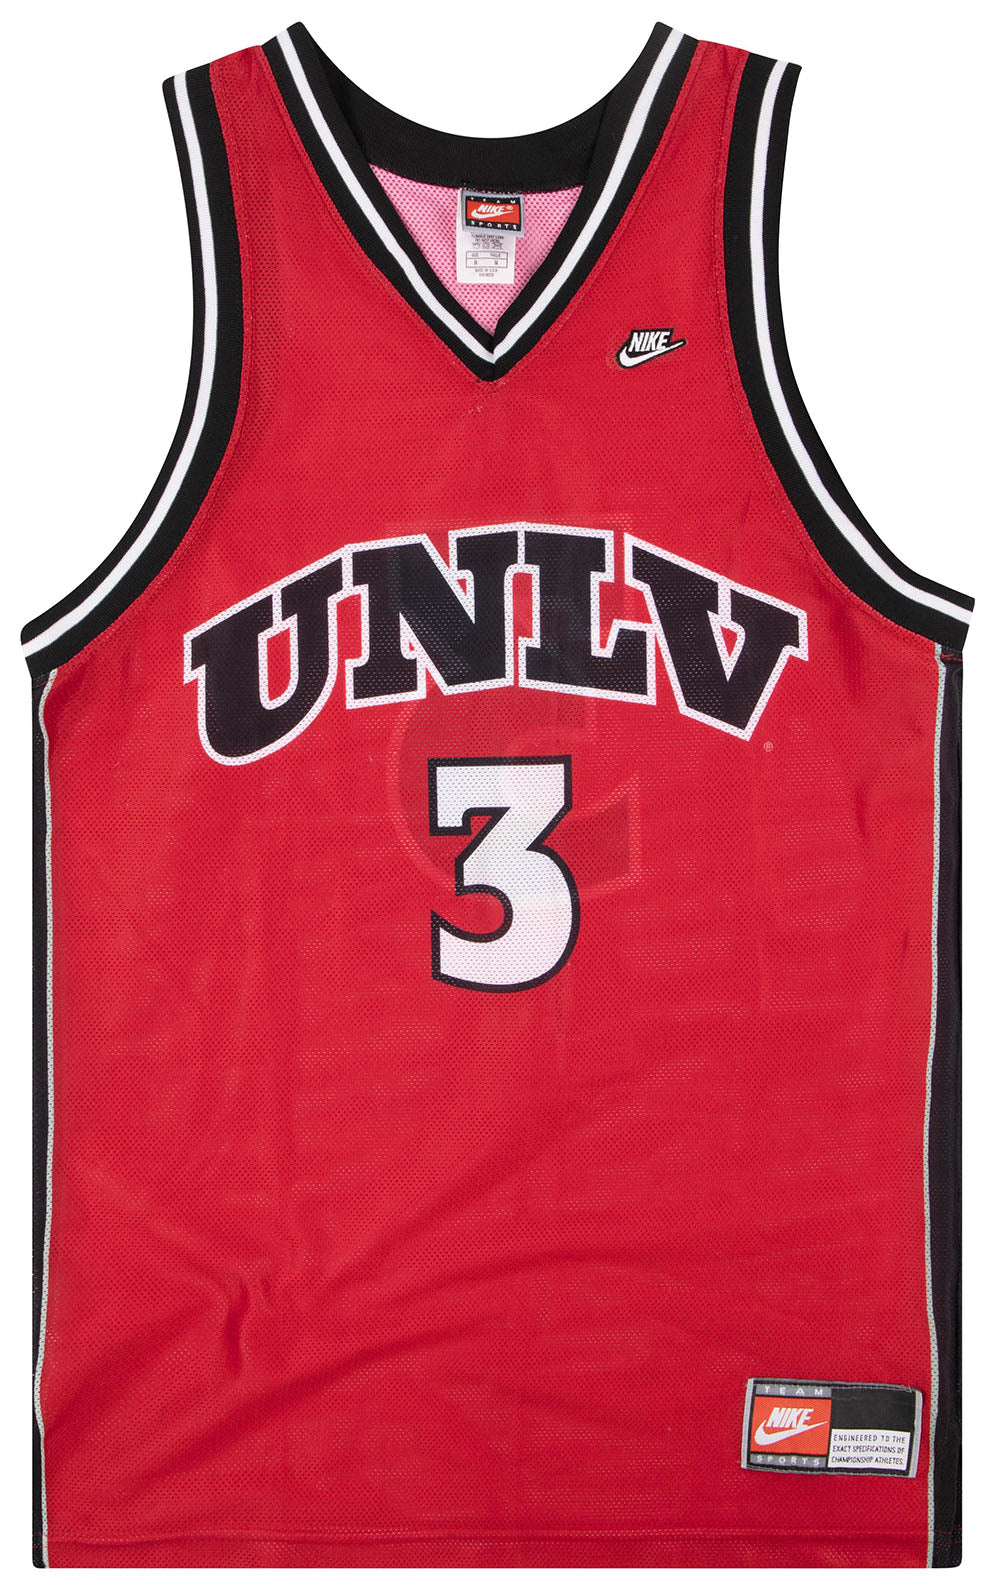 Sublimated UNLV Rebels White Jersey